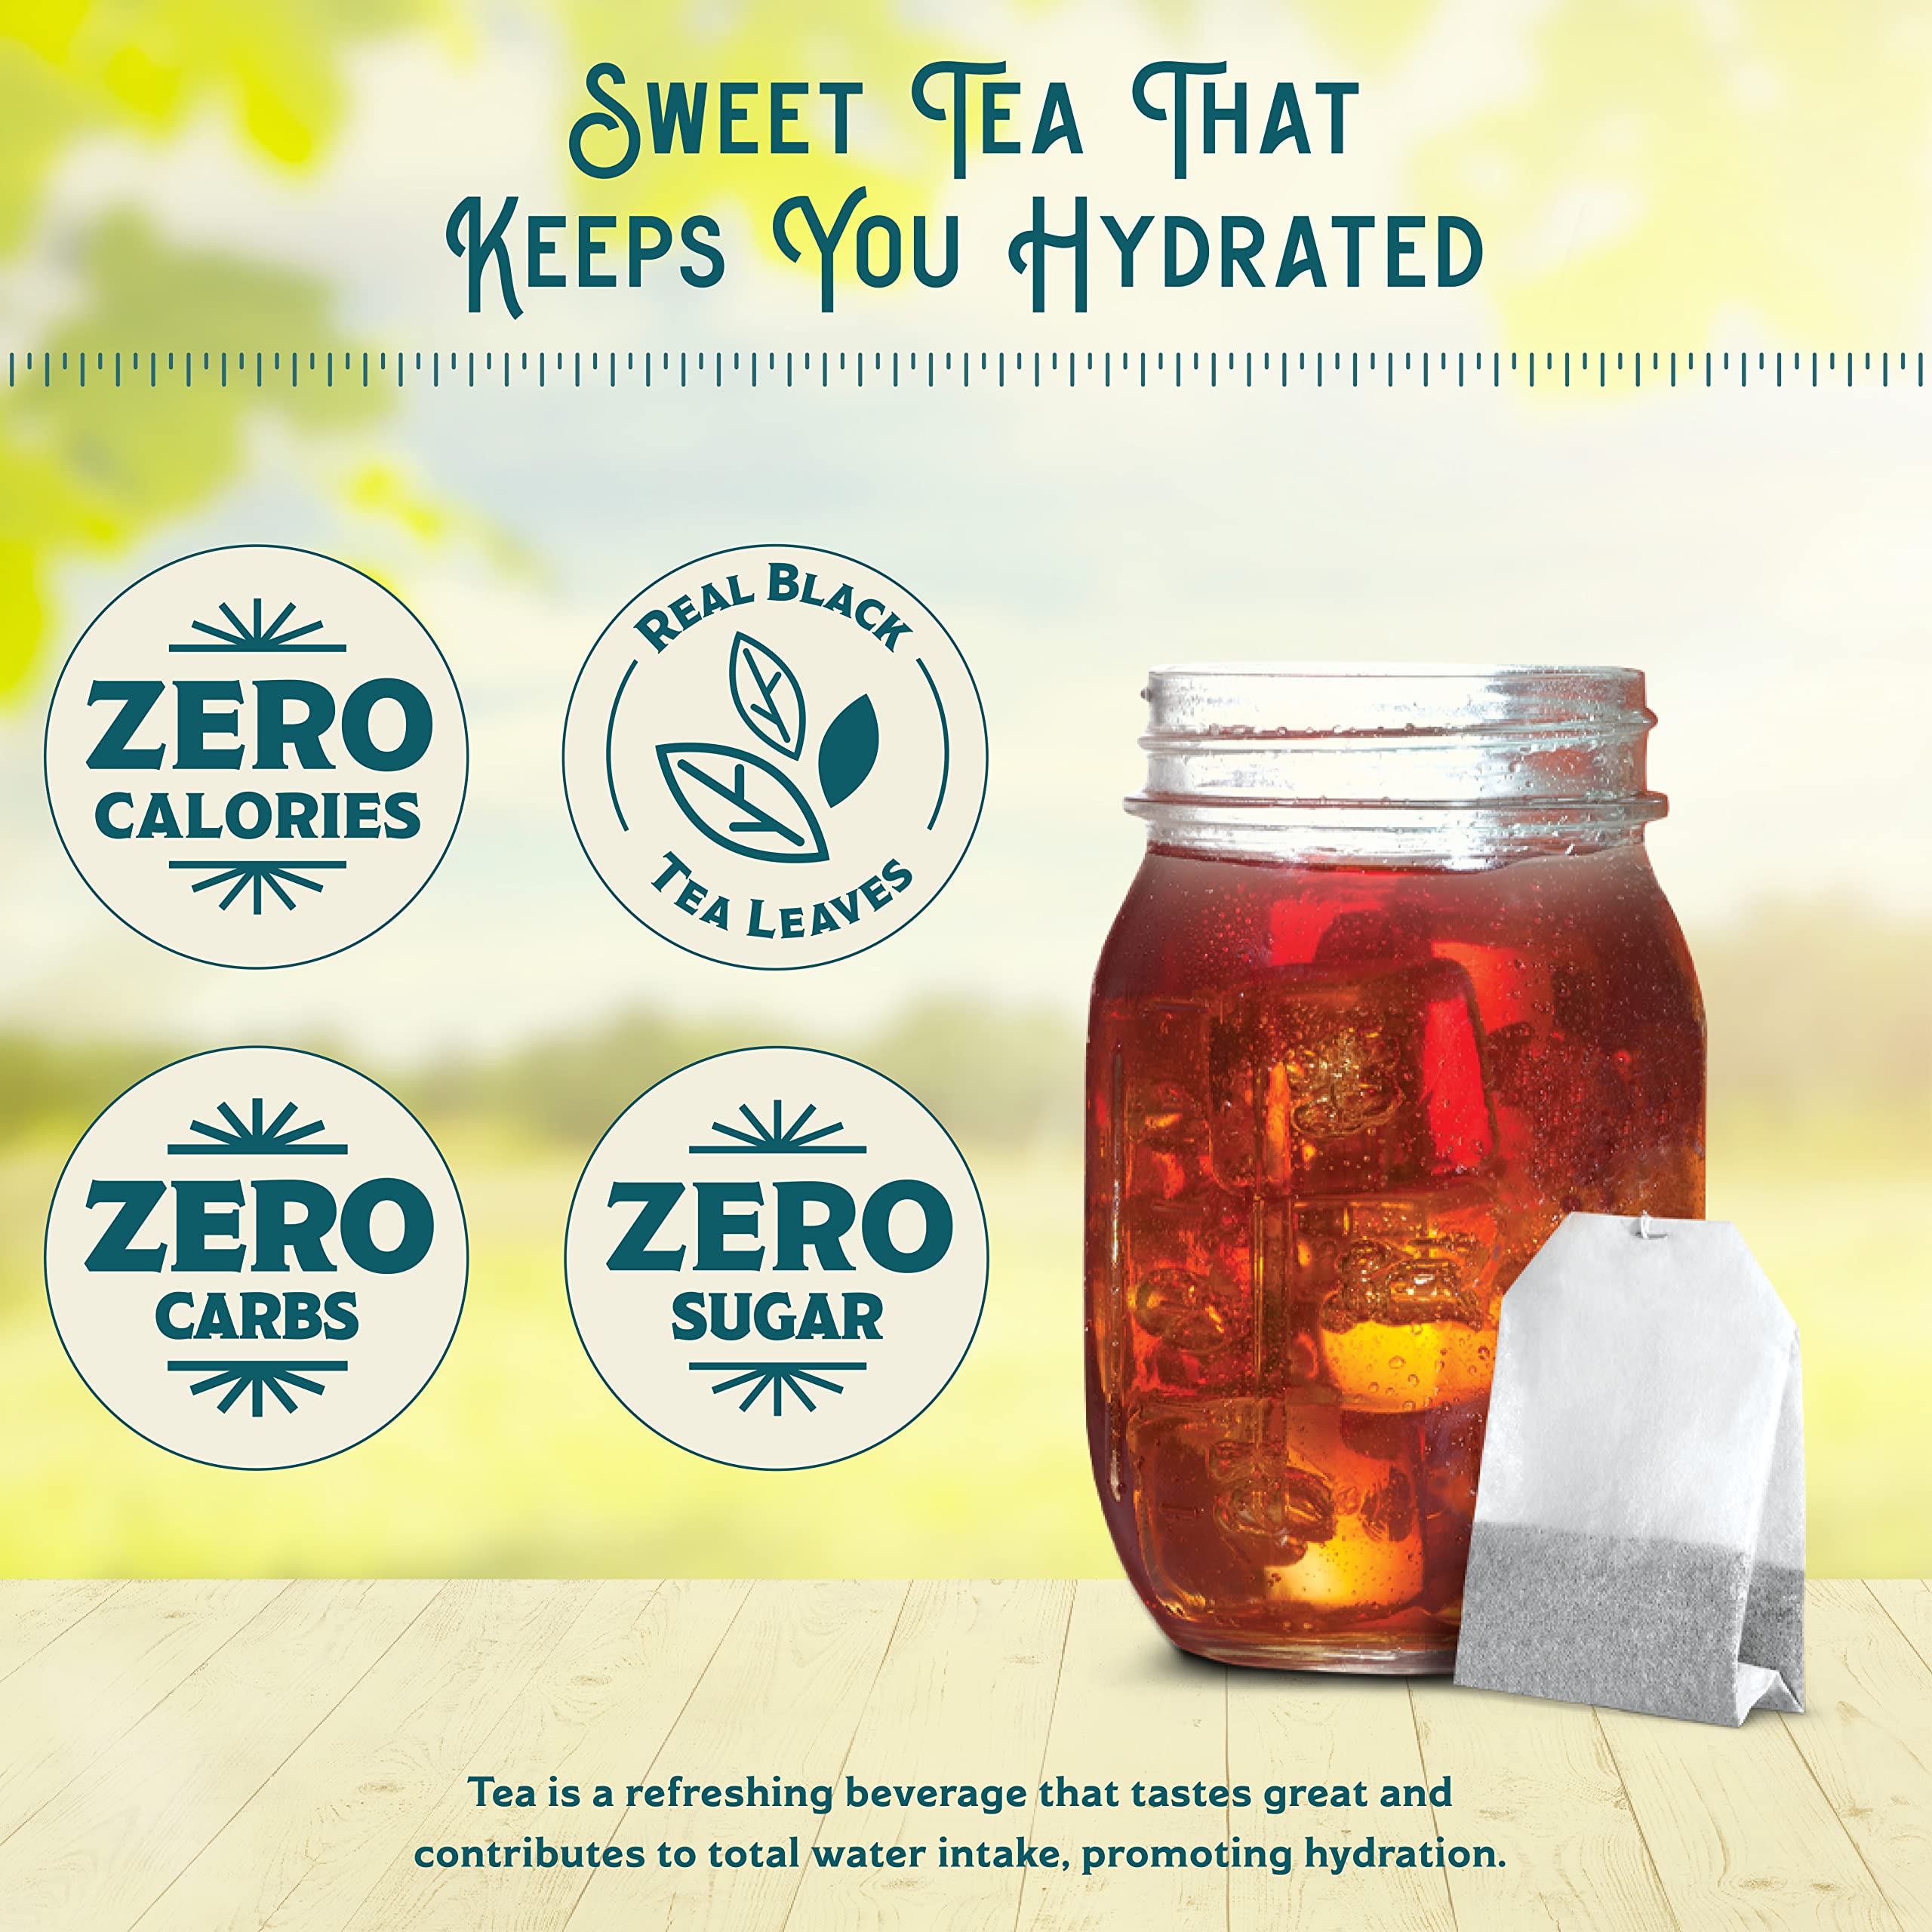 Southern Breeze Cold Brew Sweet Tea Blackberry Iced Tea with Black Tea and Zero Carbs Zero Sugar, 20 Individually Wrapped Tea Bags, Pack of 4